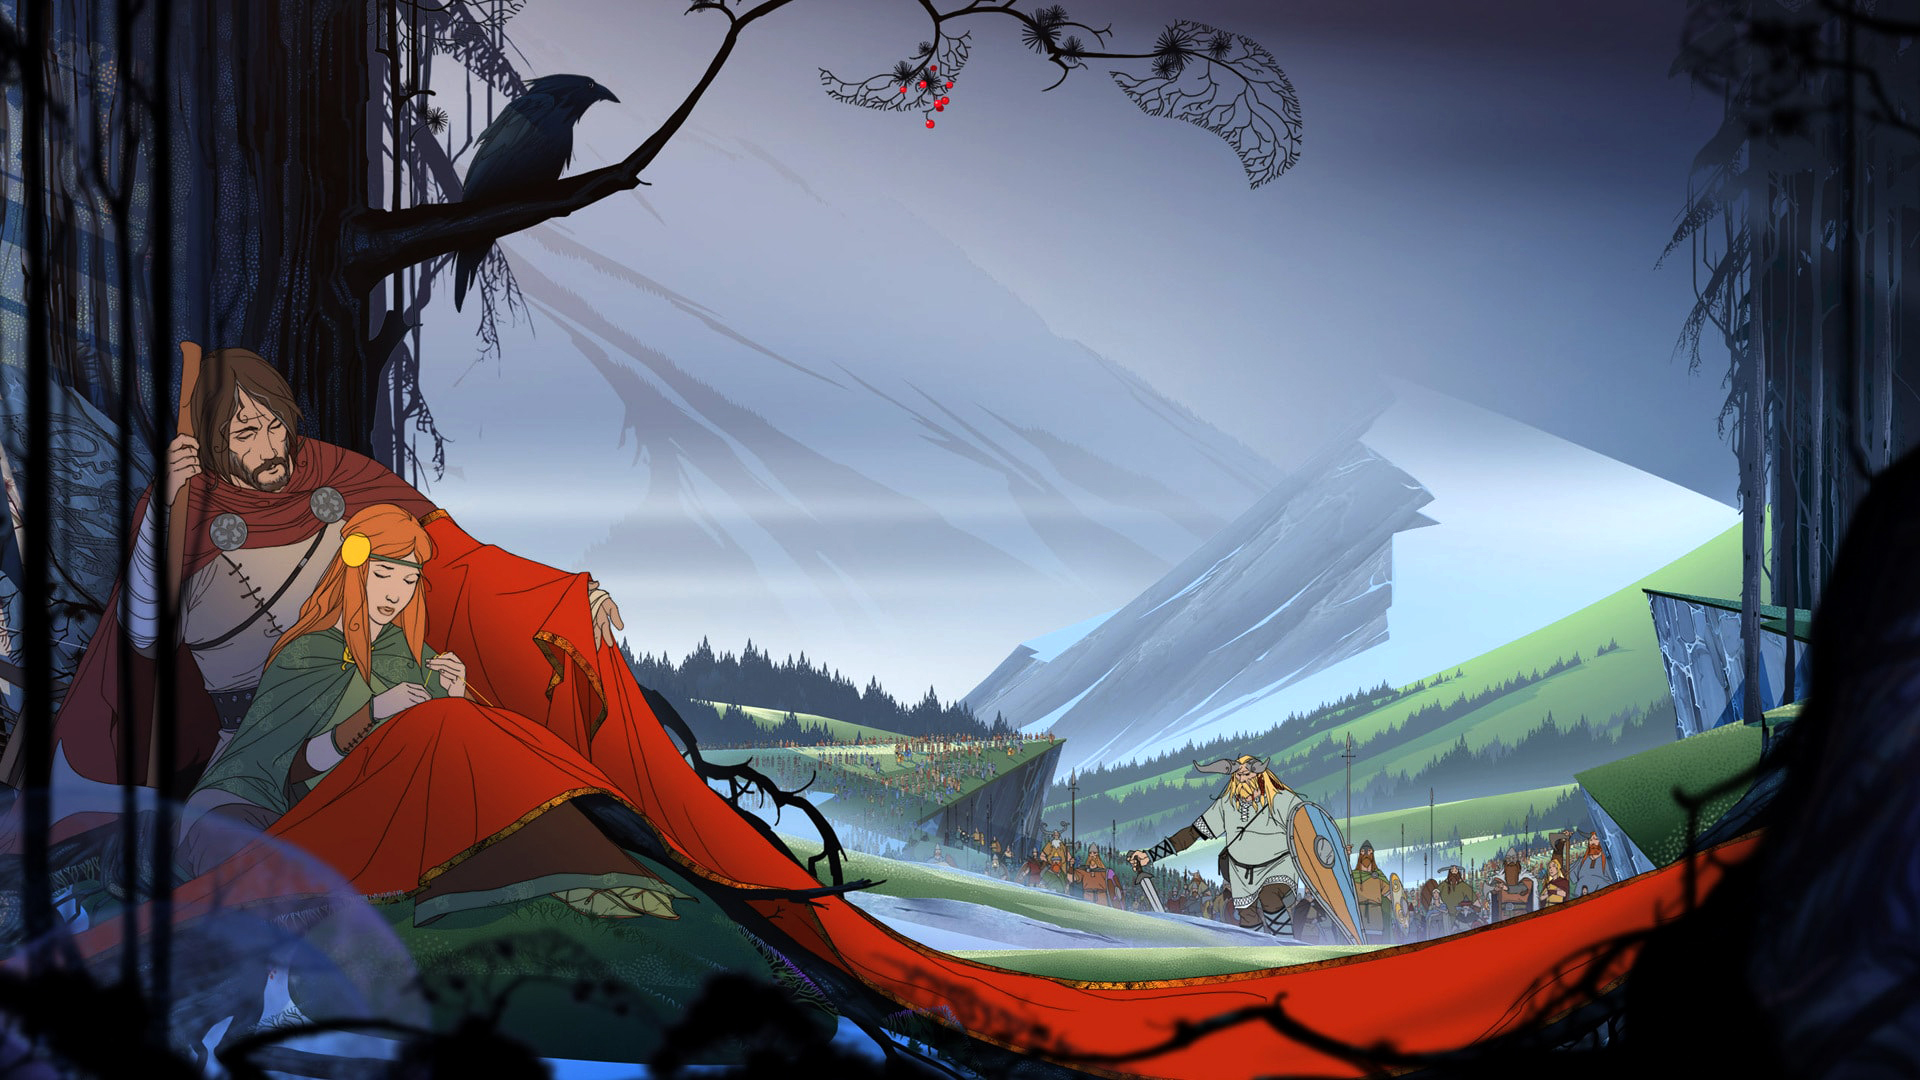 General 1920x1080 The Banner Saga Stoïc Vikings redhead father mountains trees RPG video game art video game characters Varl shield horns fantasy art cuddle